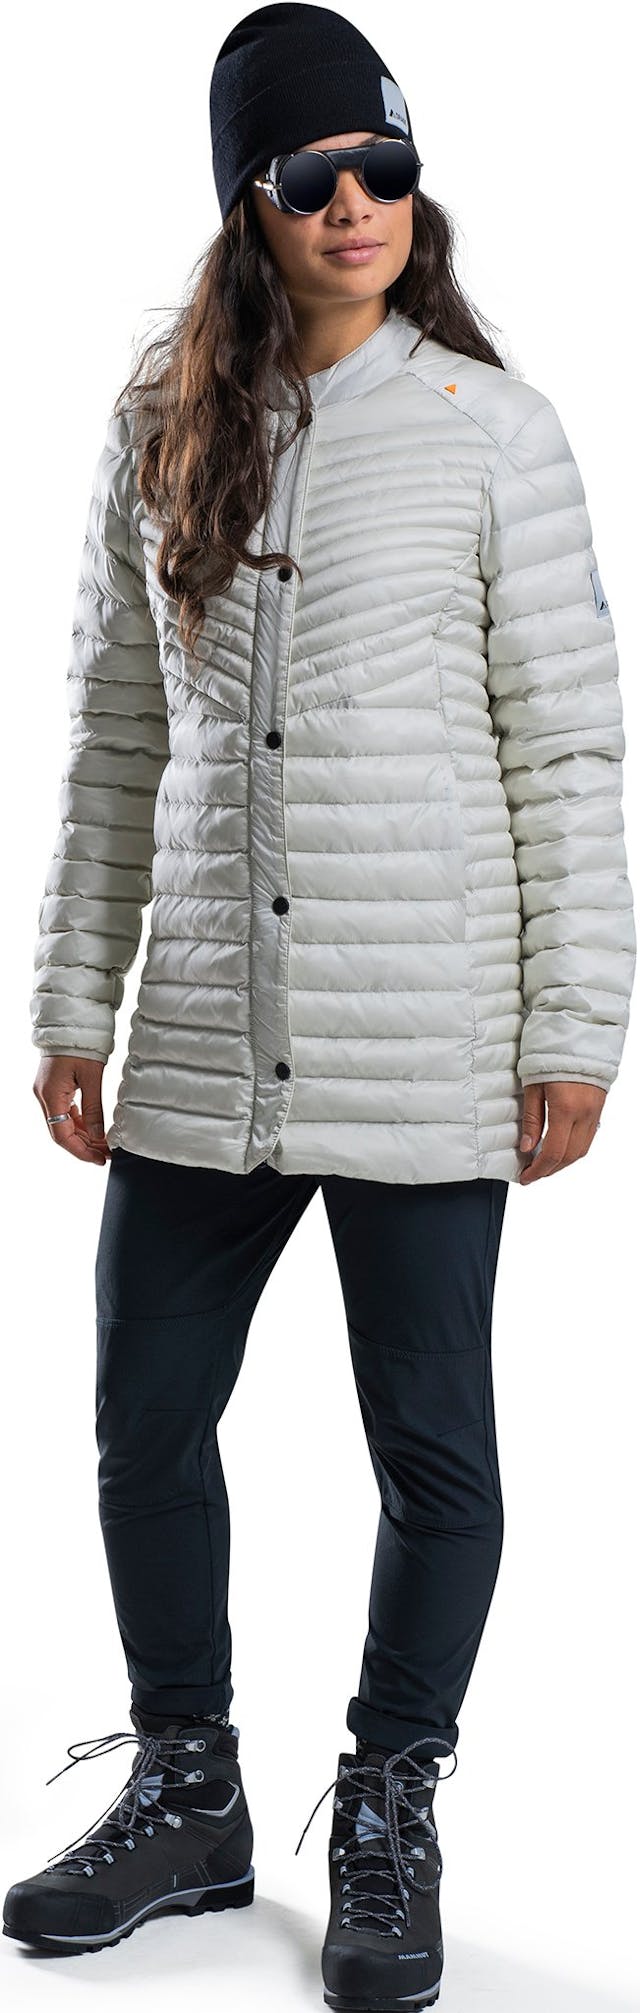 Product image for Shelter Synthetic Down Insulator Jacket - Women's